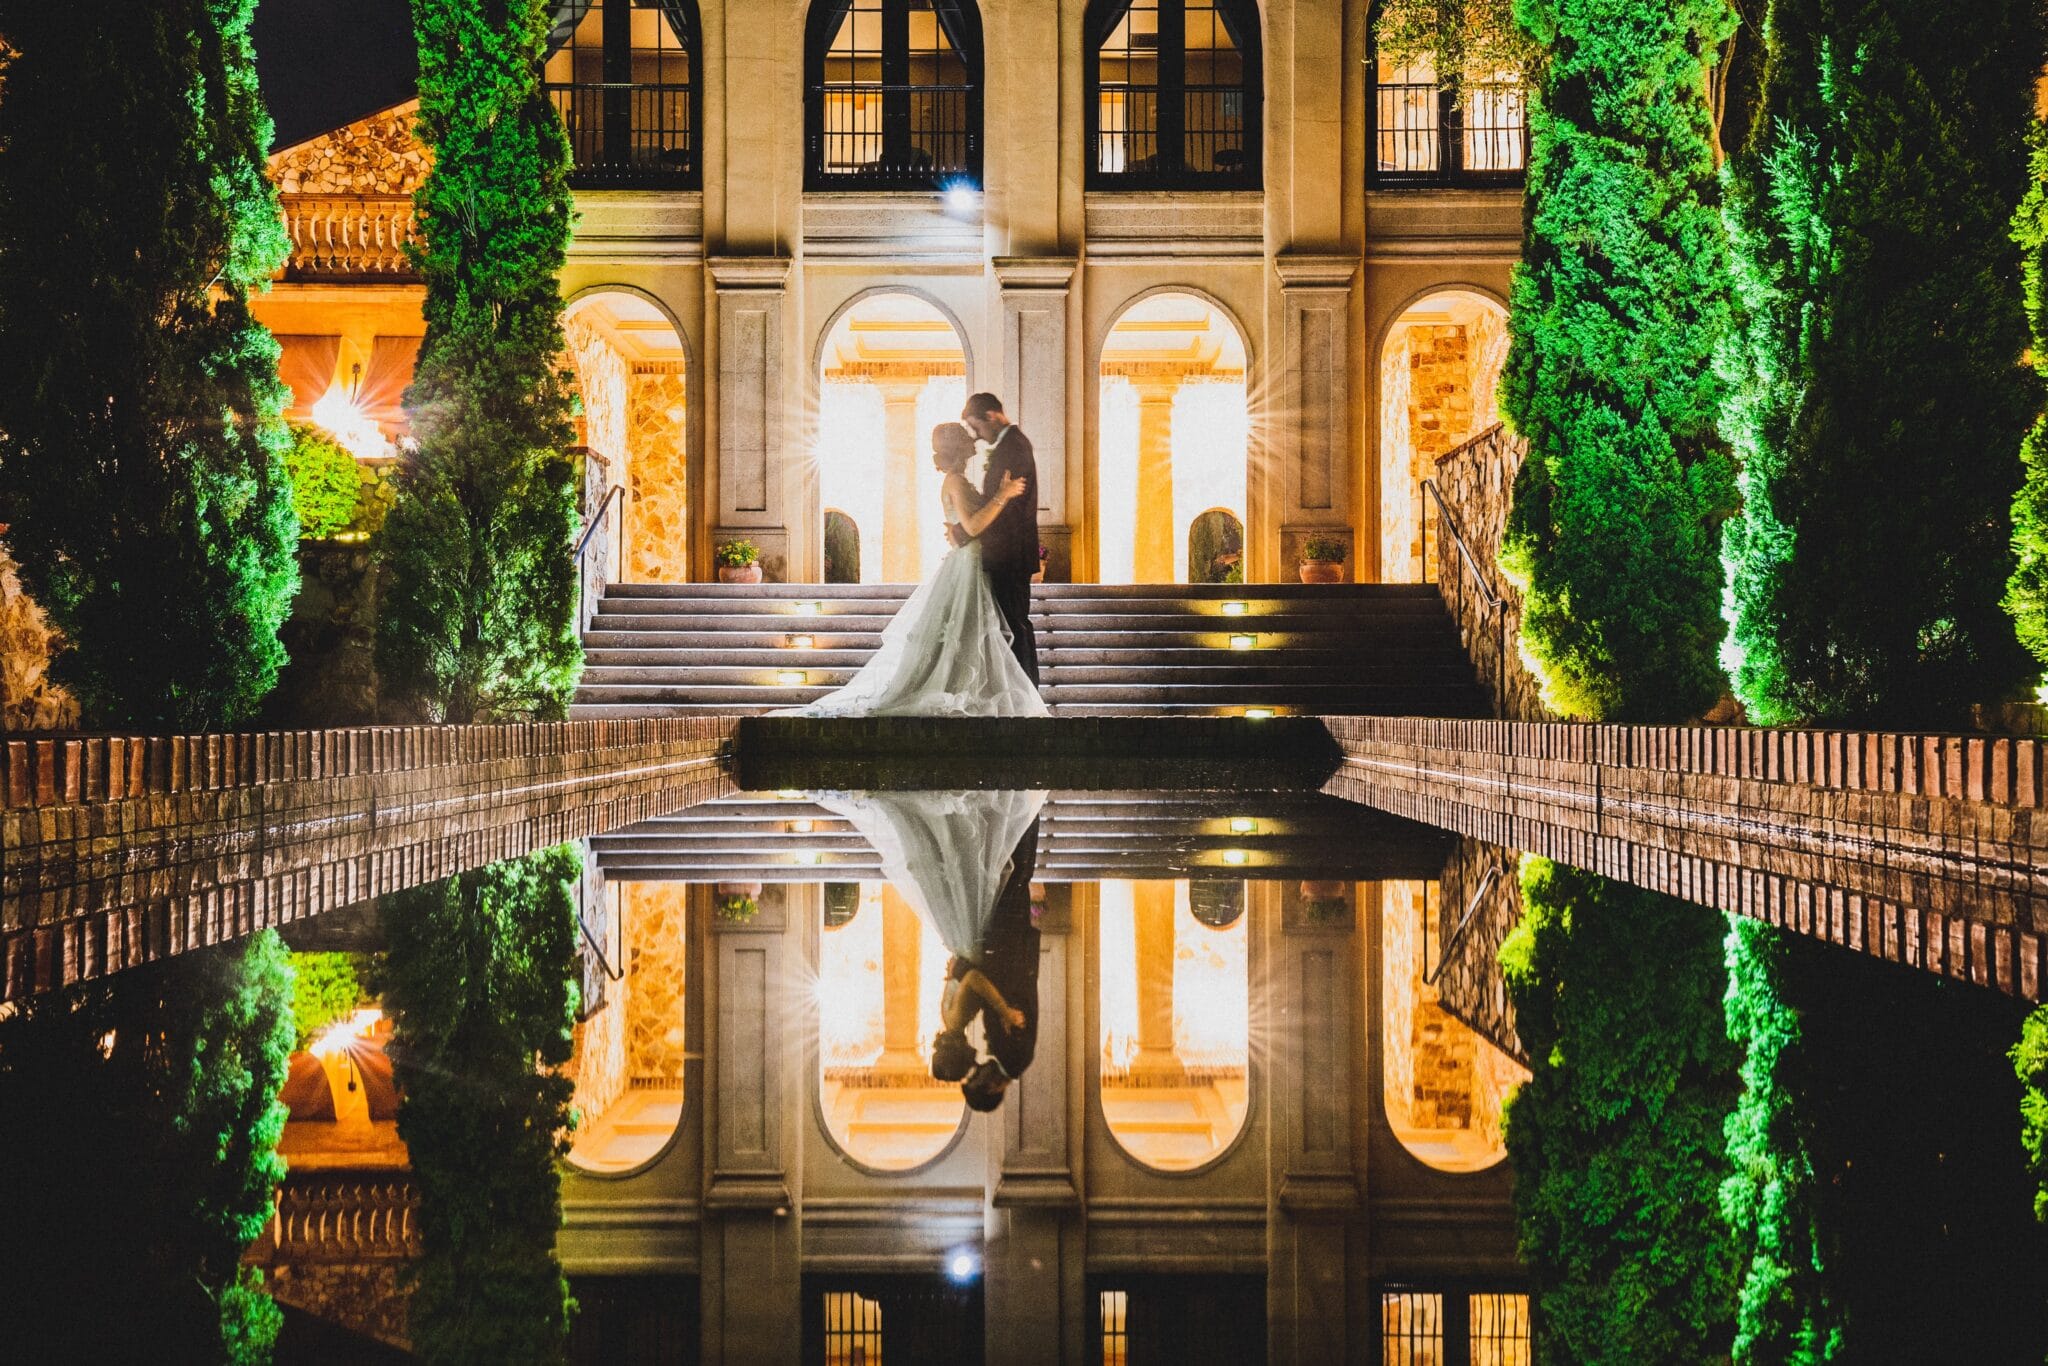 Bride and groom illuminated in water in front of building at night